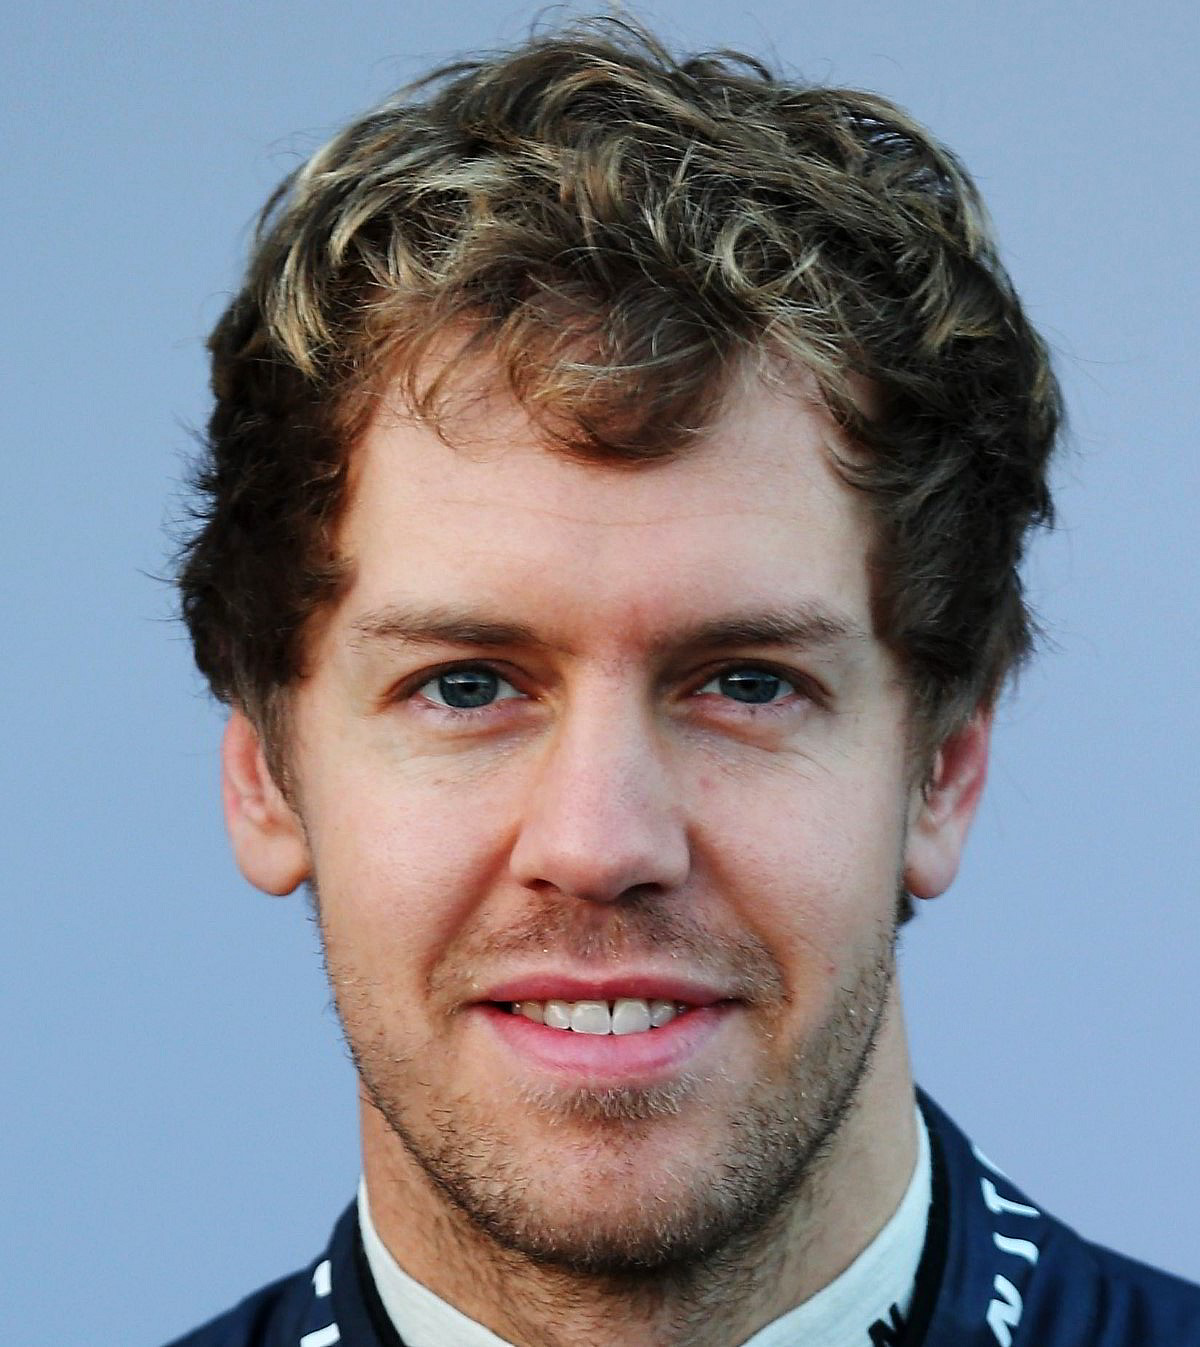 Vettel trained with Hintsa while with Red Bull